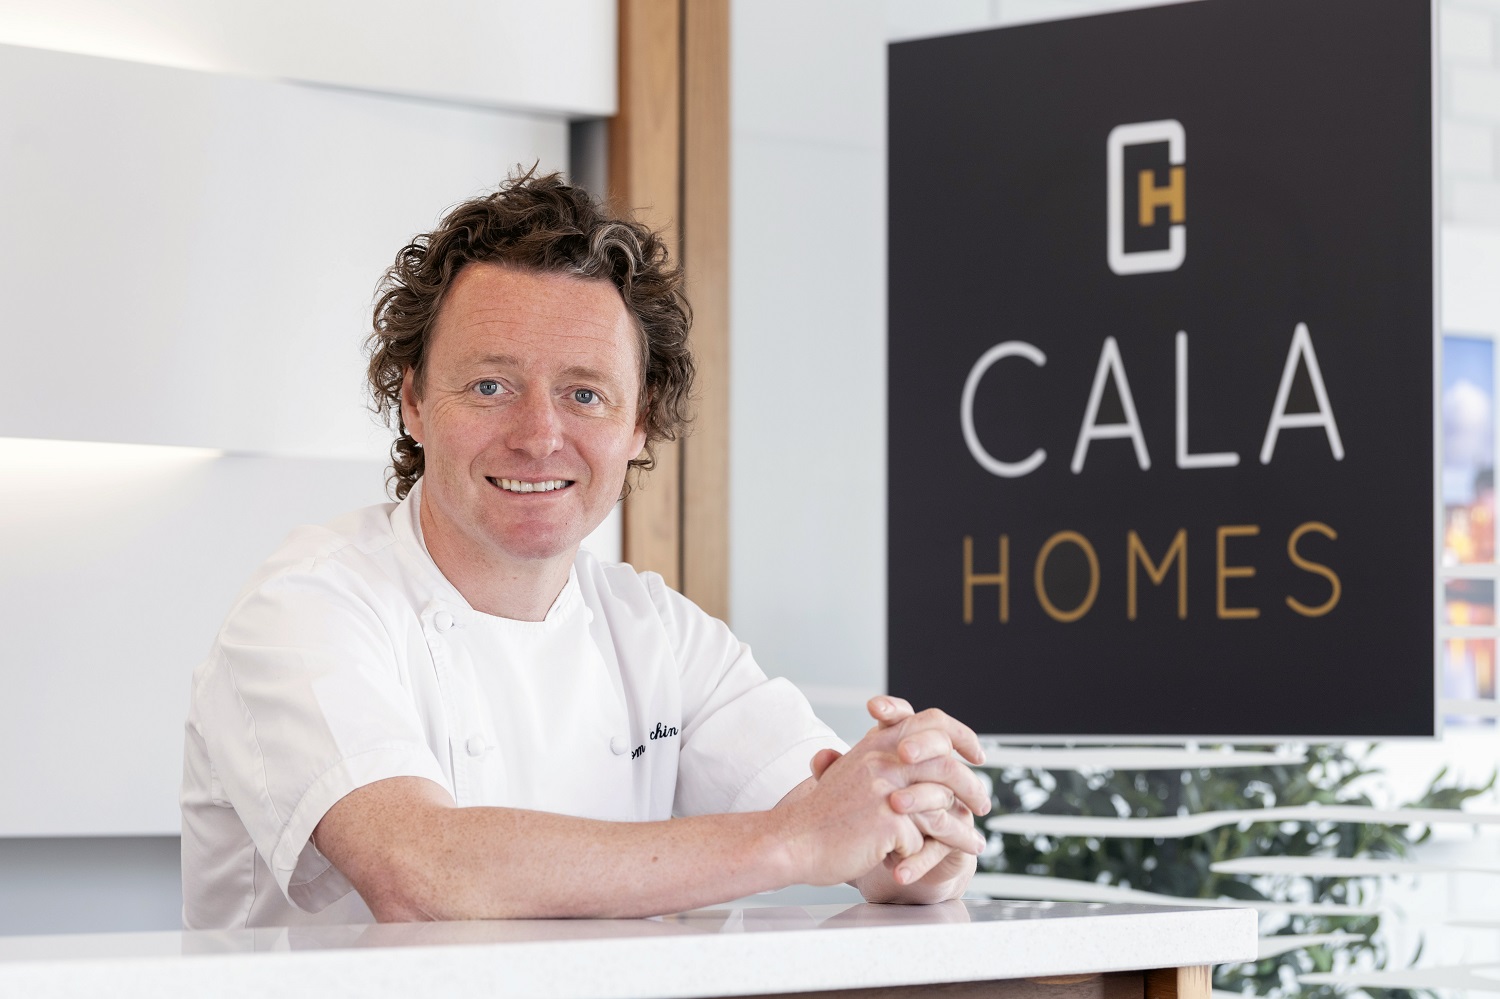 CALA partners with Tom Kitchin for show home cook-along